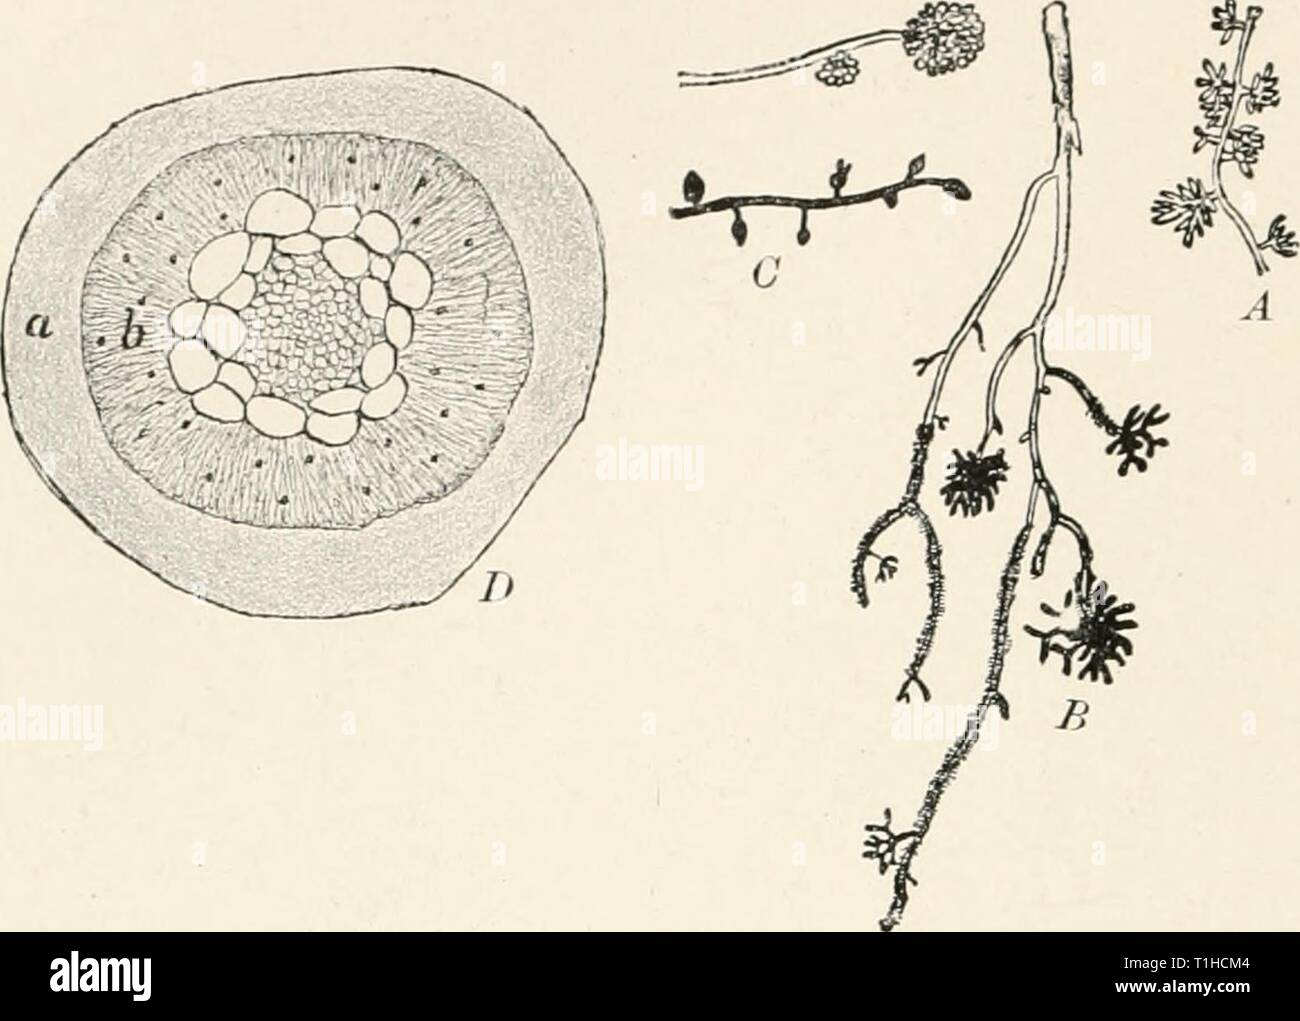 Diseases of plants induced by Diseases of plants induced by cryptogamuc parasites; introduction to the study of pathogenic fungi, slime-fungi, bacteria, and algae. English ed. by William G. Smith  diseasesofplants00tubeuoft Year: 1897  96 SYMBIOSIS. in Monotnqxi. The root-system of a tree has not only to secure nourishment, Imt also the rigidity and stability of the tree. This latter can only be attained by a wide distribution of roots in the firm subsoil free from humus, where normal roots with root-hairs will be formed. The nursing function of the mycorhiza seems thus to be less important th Stock Photo